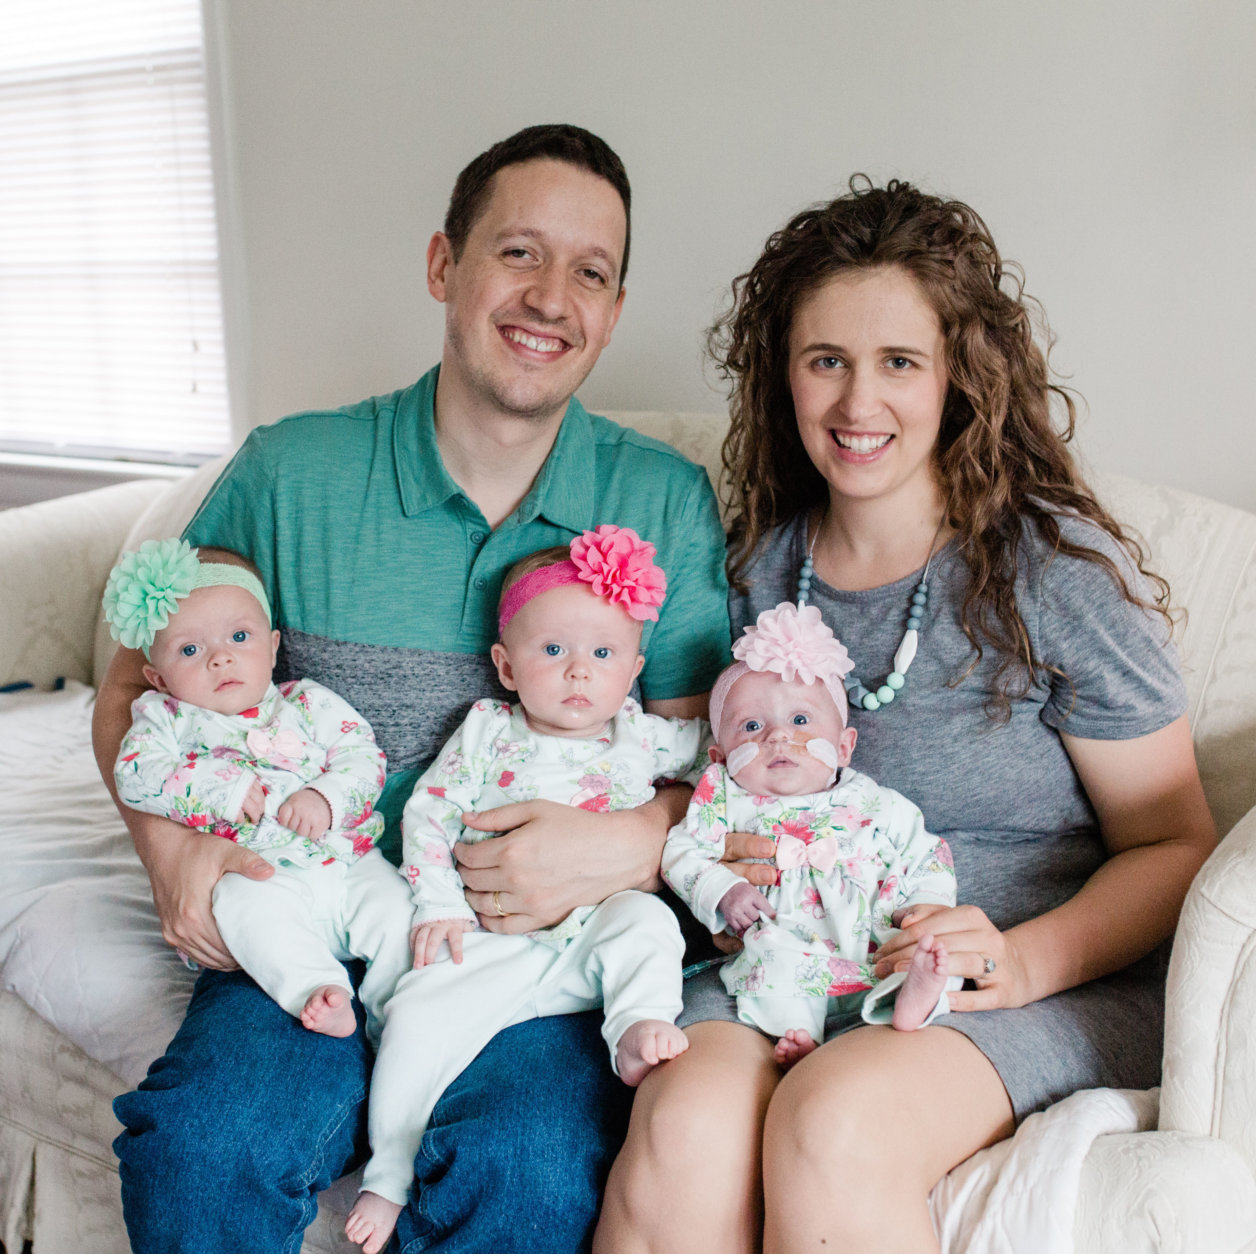 The Rueger family in May 2018. Paul and Abigail with Rose in dark pink, Julia in light pink and Elise in green. (Courtesy Rueger family)